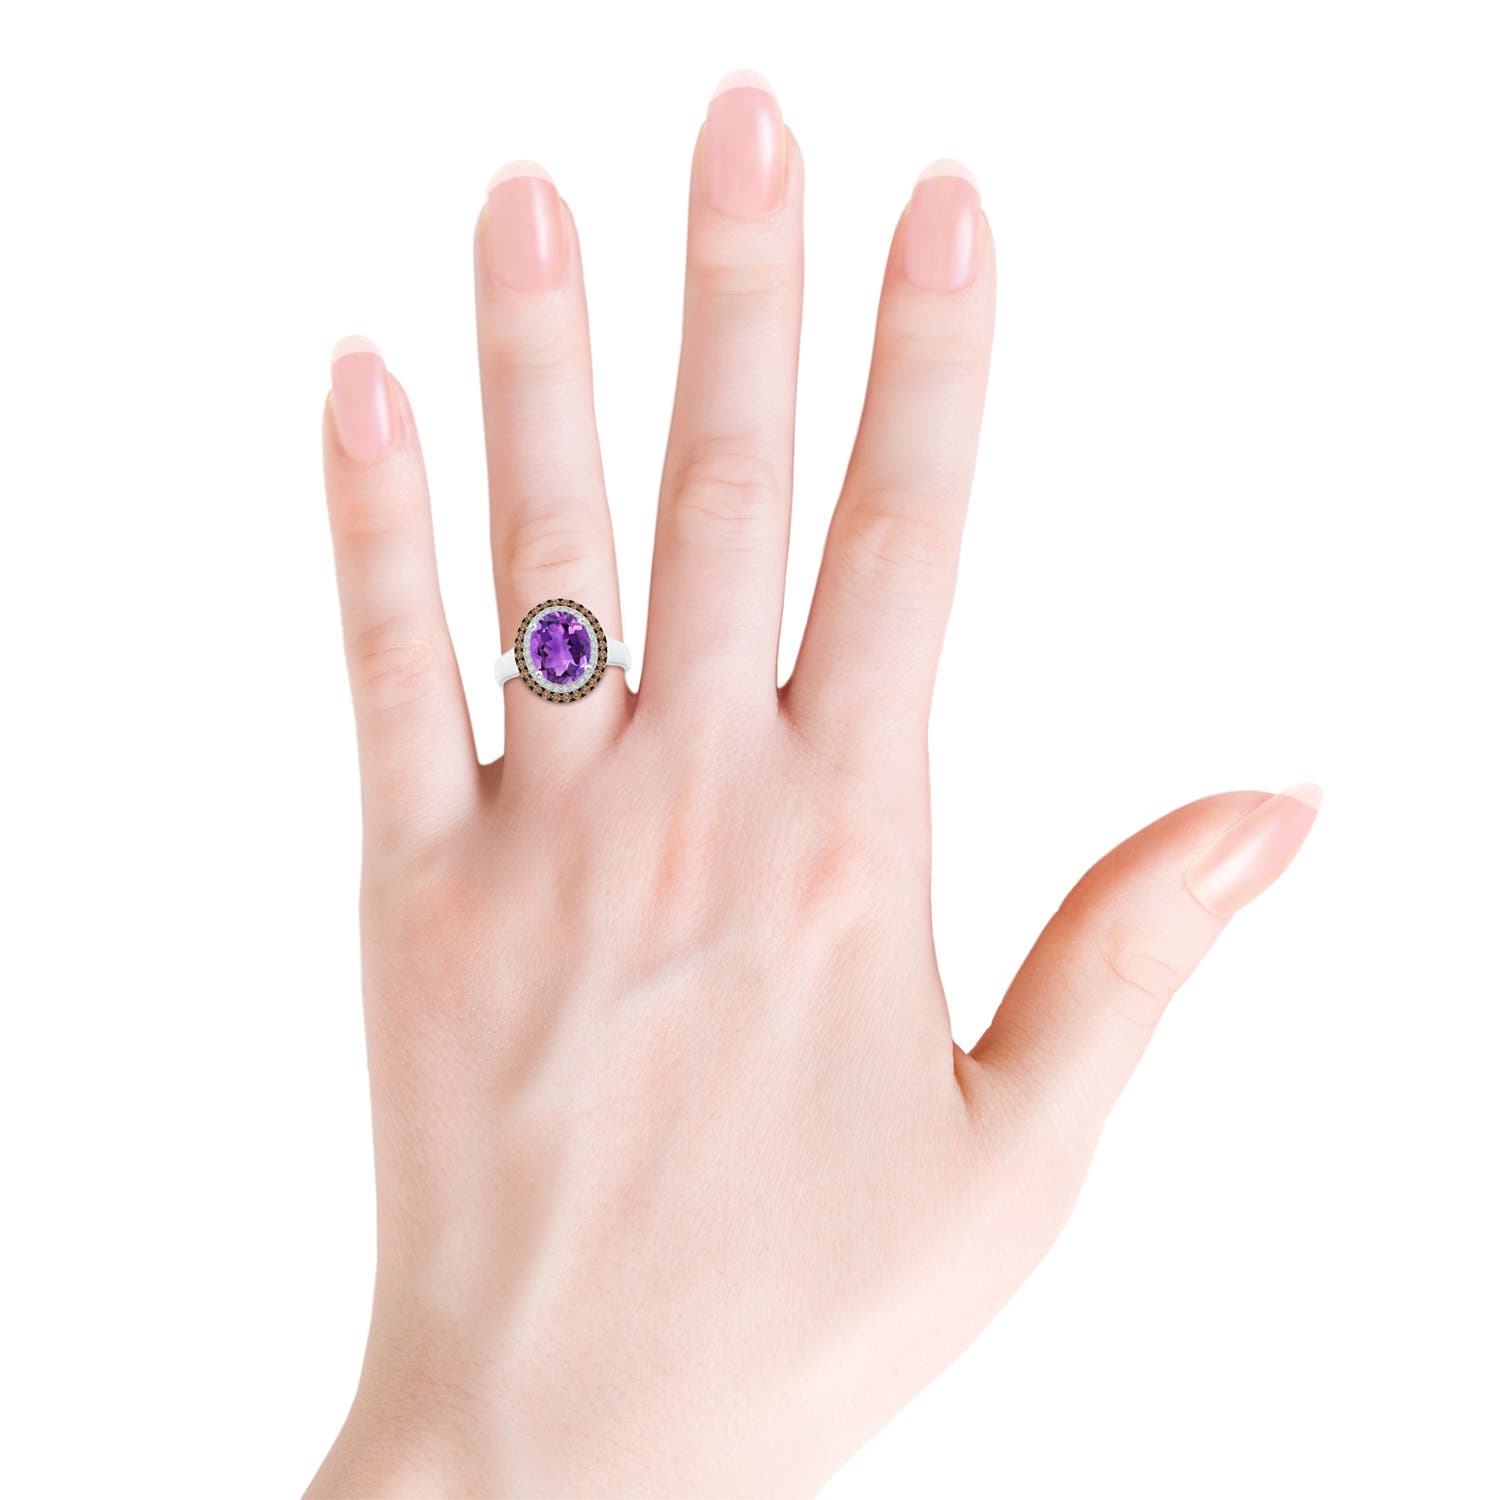 AAA - Amethyst / 2.7 CT / 14 KT White Gold